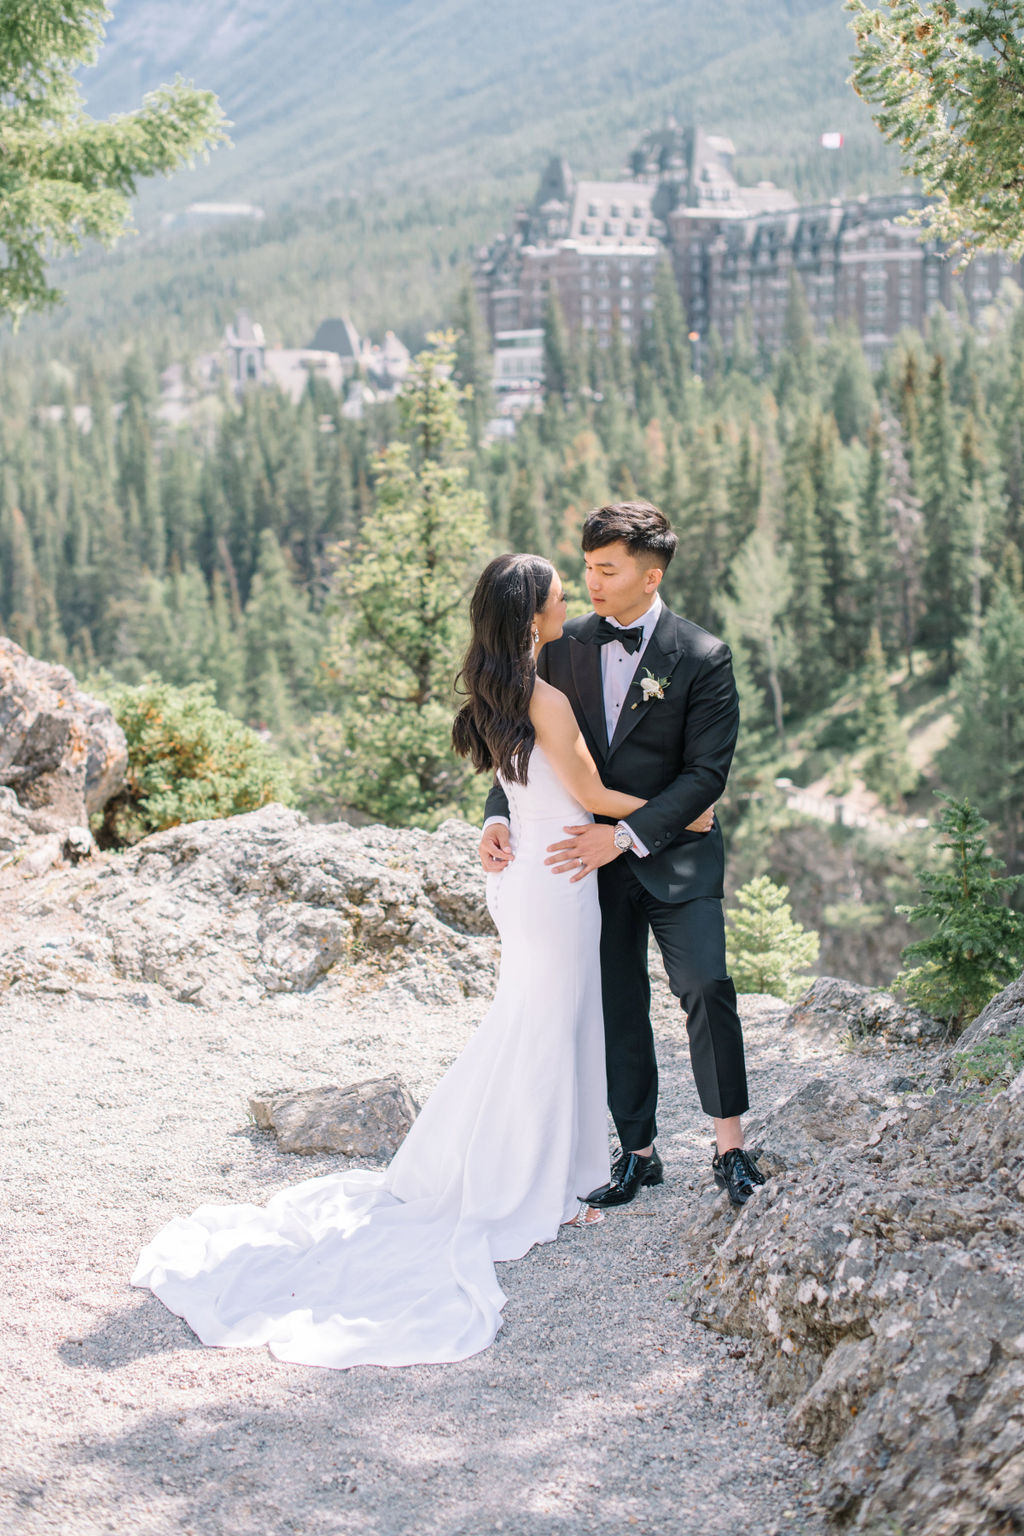 Elegant bride and groom embracing in the mountains with Fairmont Banff Springs Golf and Country Club in the background.  Canadian summer mountain wedding inspiration.